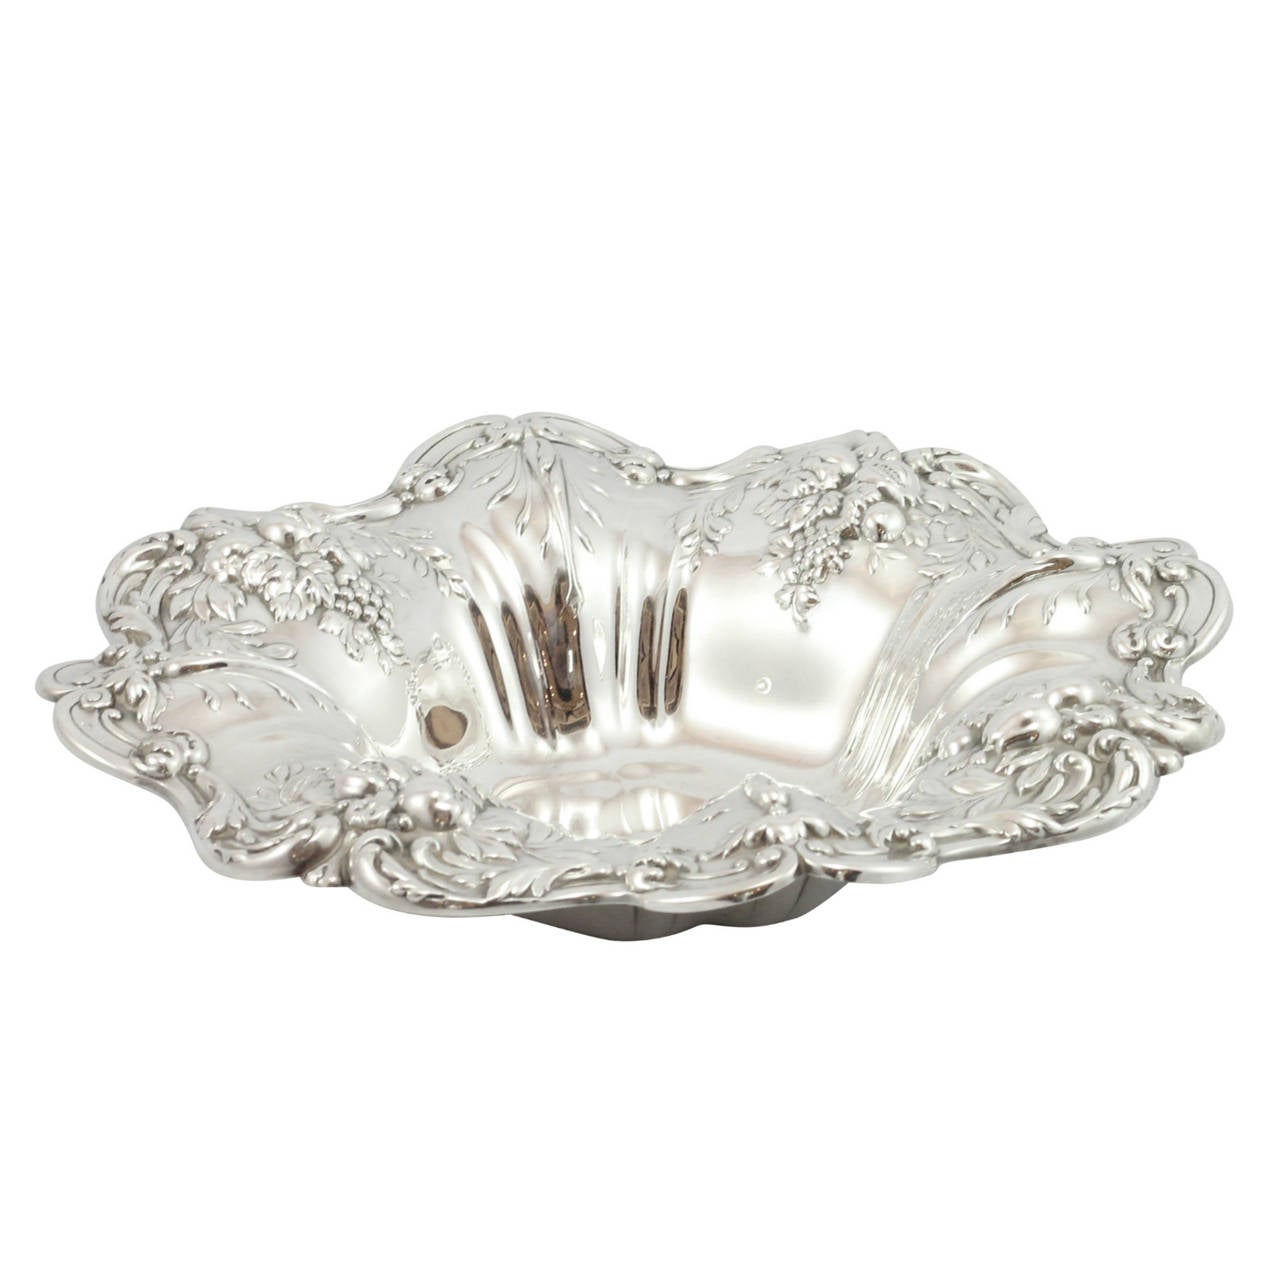 Sterling silver 'Francis I' repoussé fruit bowl by Massachusetts Company Reed & Barton. First produced 1907.